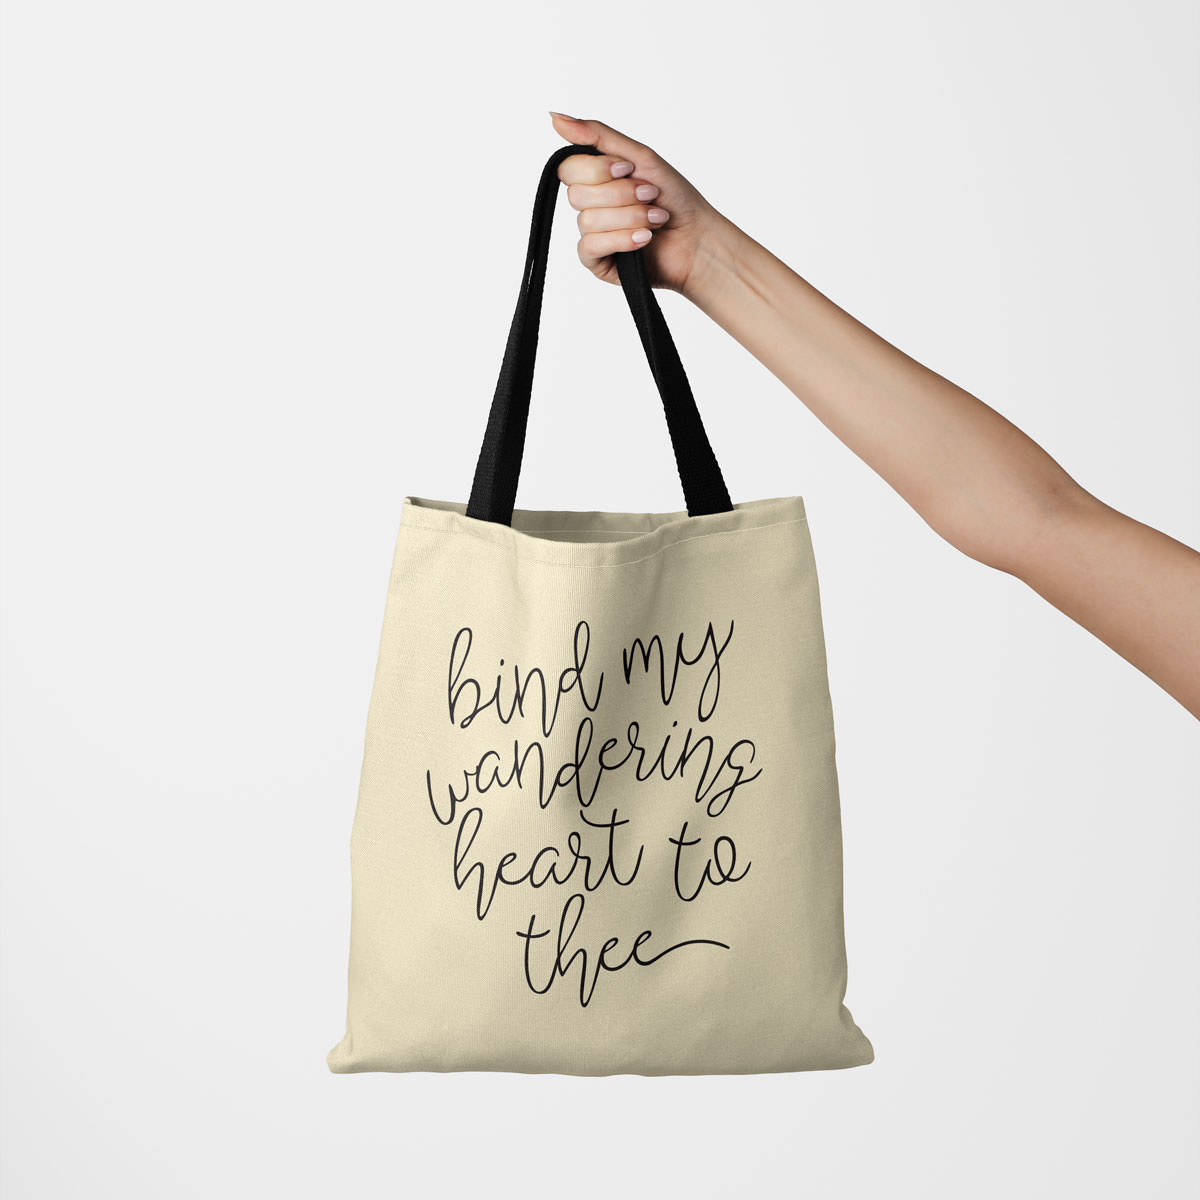 Bind My Wandering Heart To Thee Canvas Tote #2